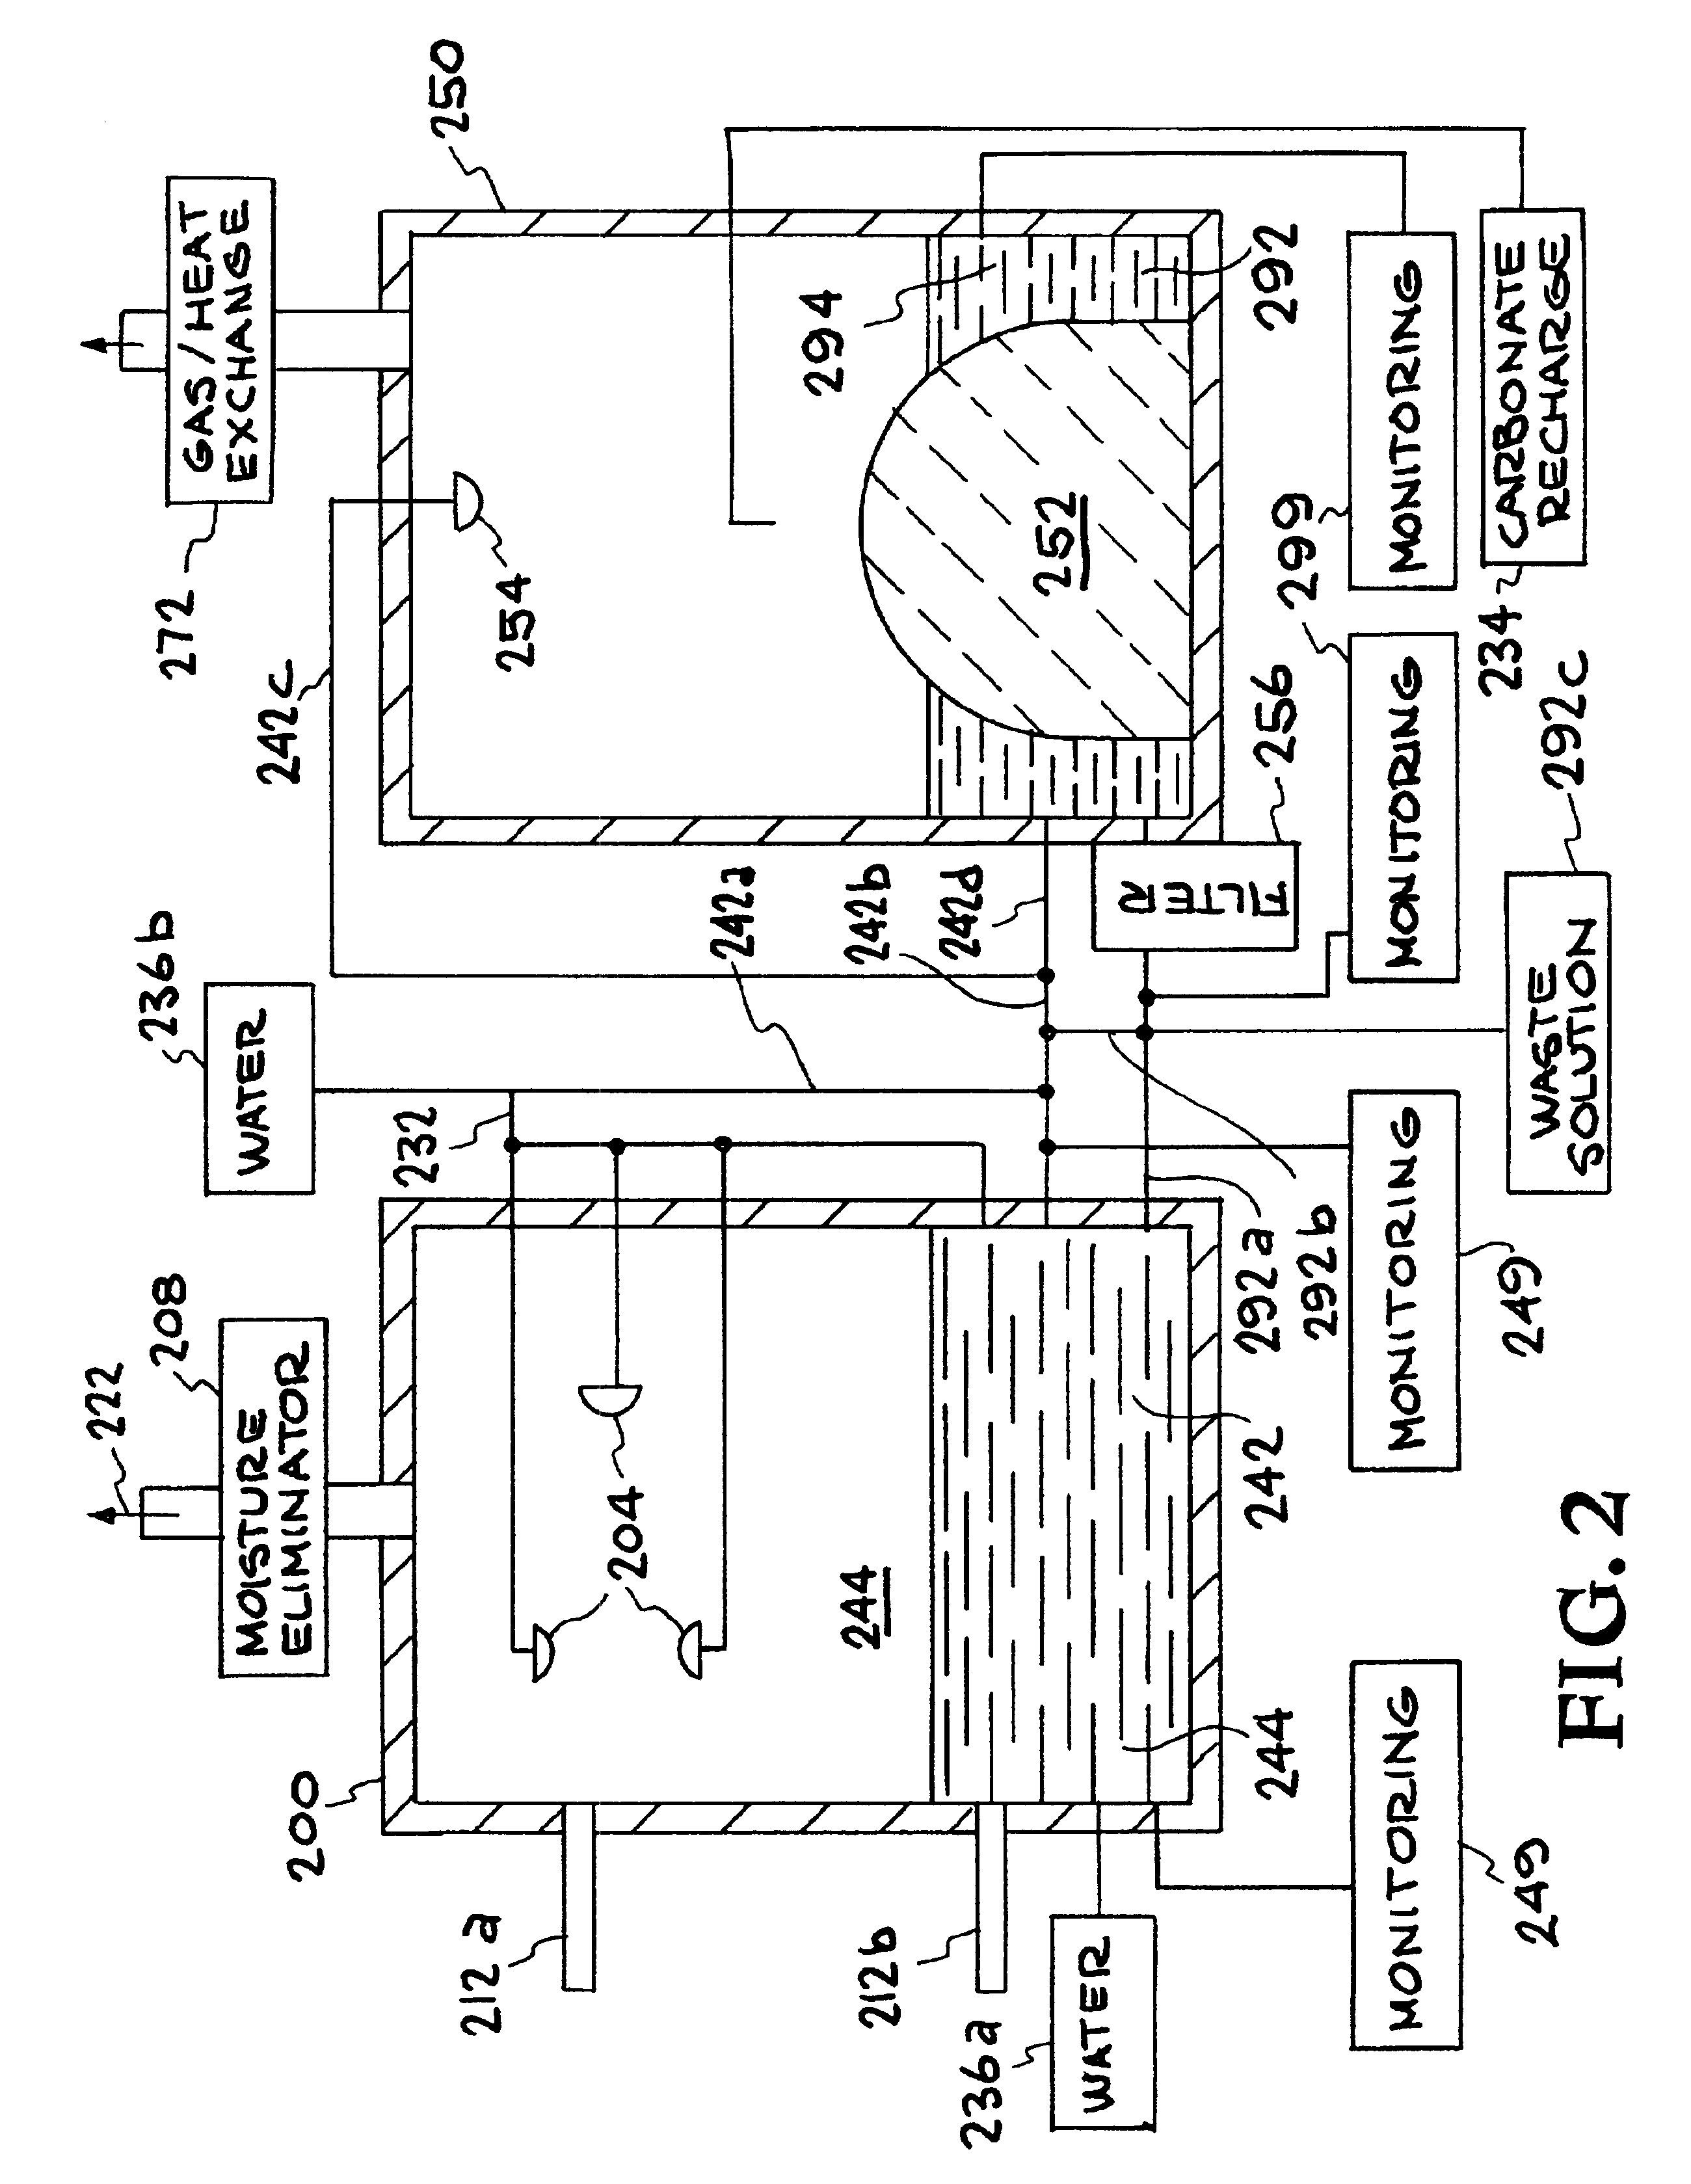 Method for extracting and sequestering carbon dioxide